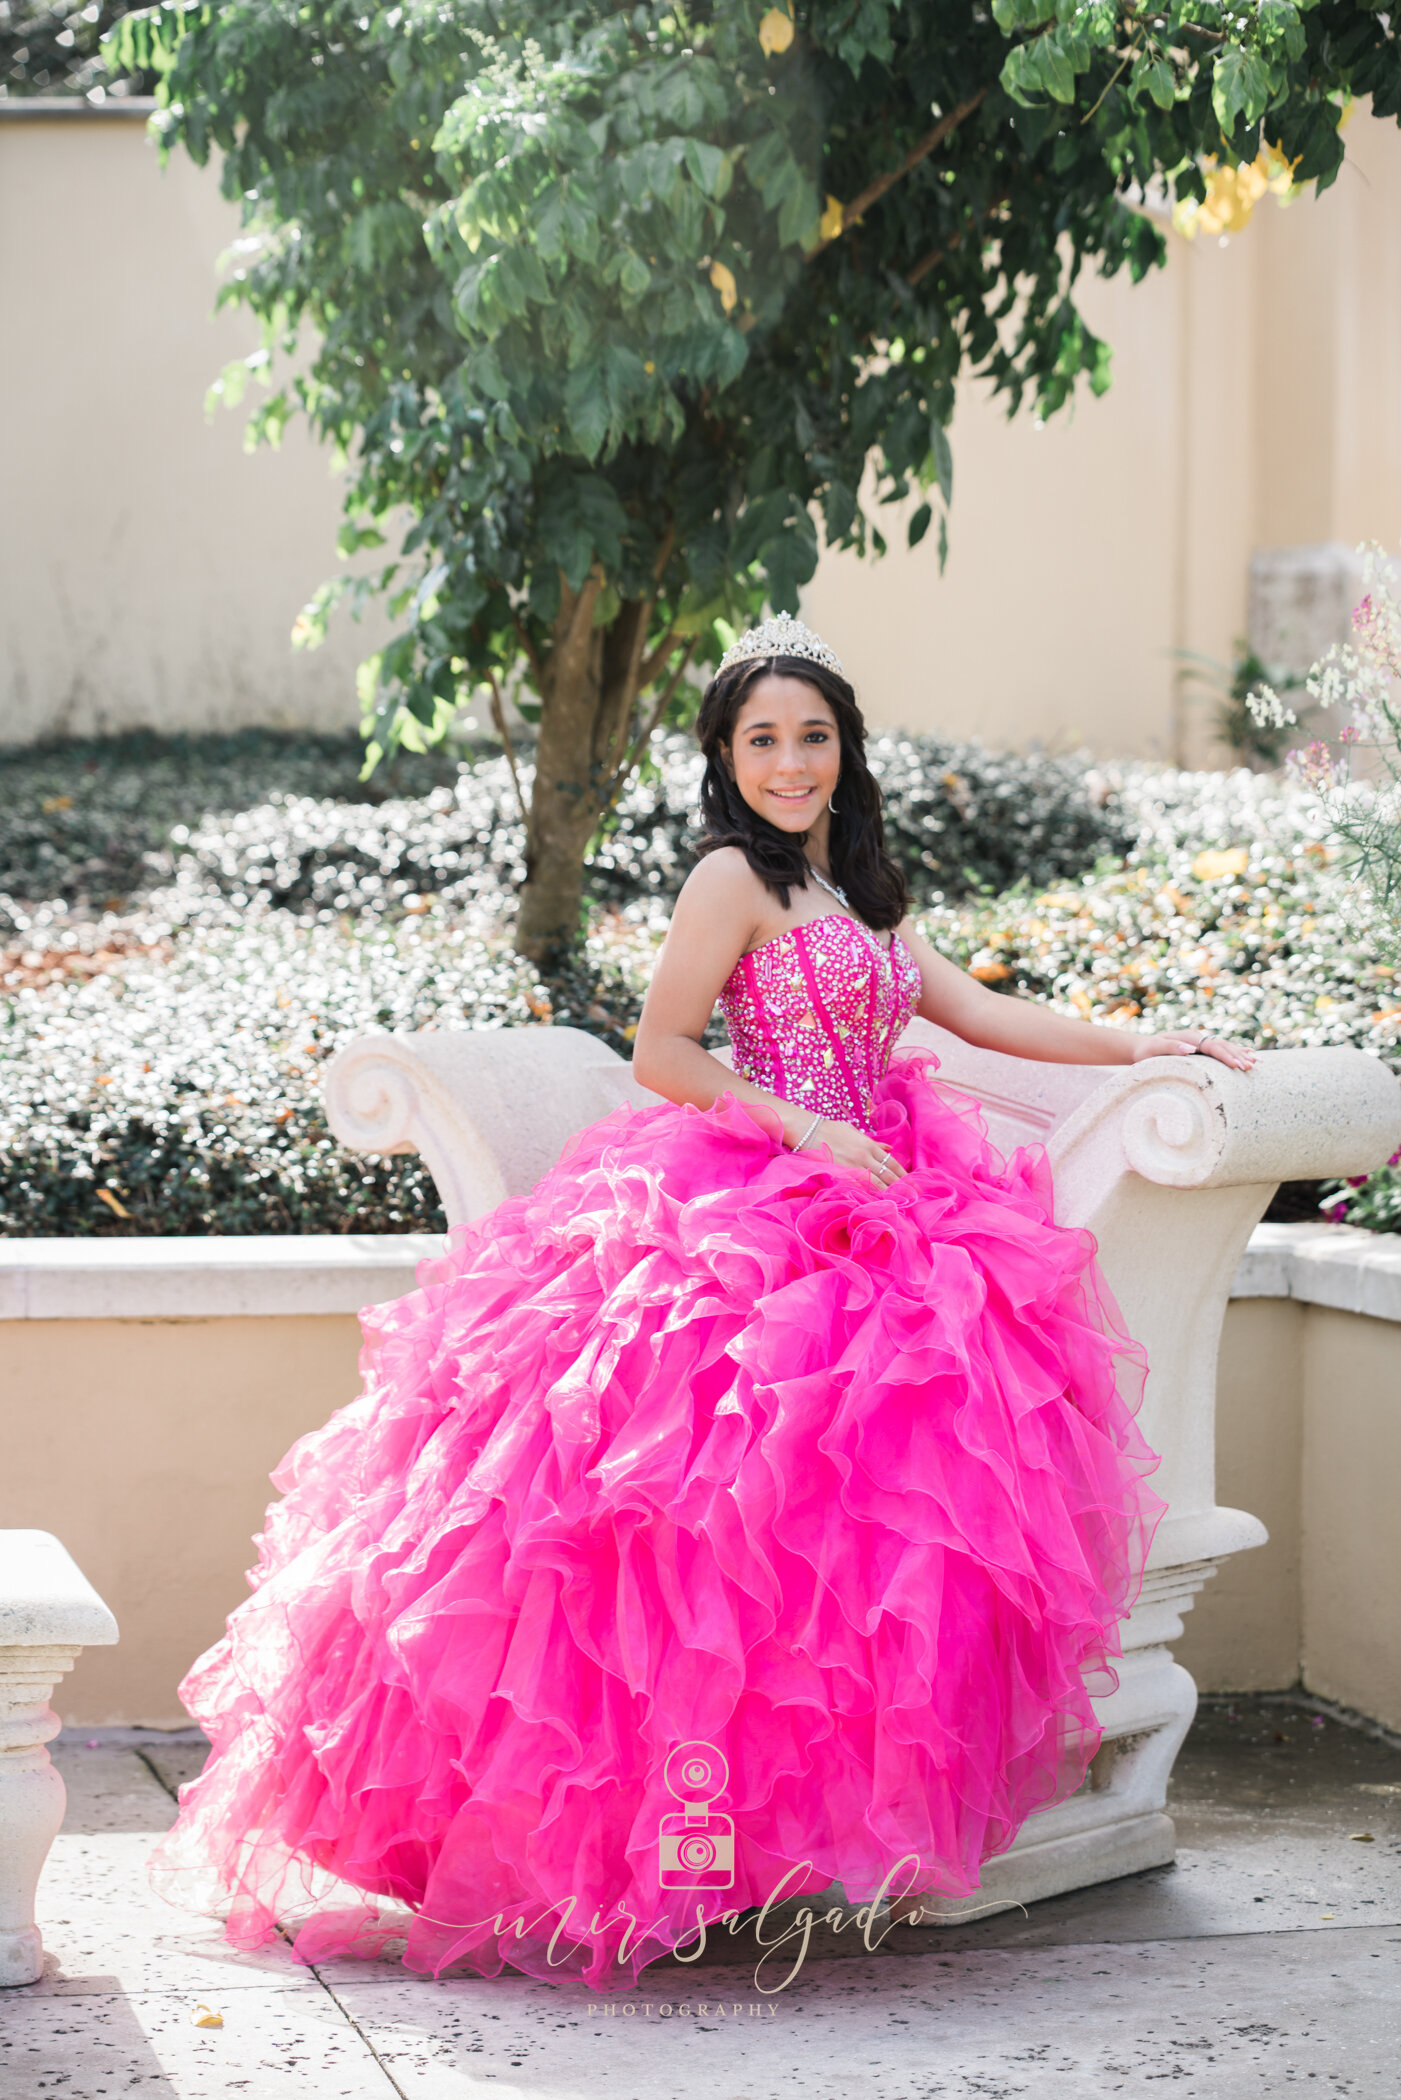 themed-quinceanera, portrait-architecture-background, glamorous-quince-dress, sweet-15